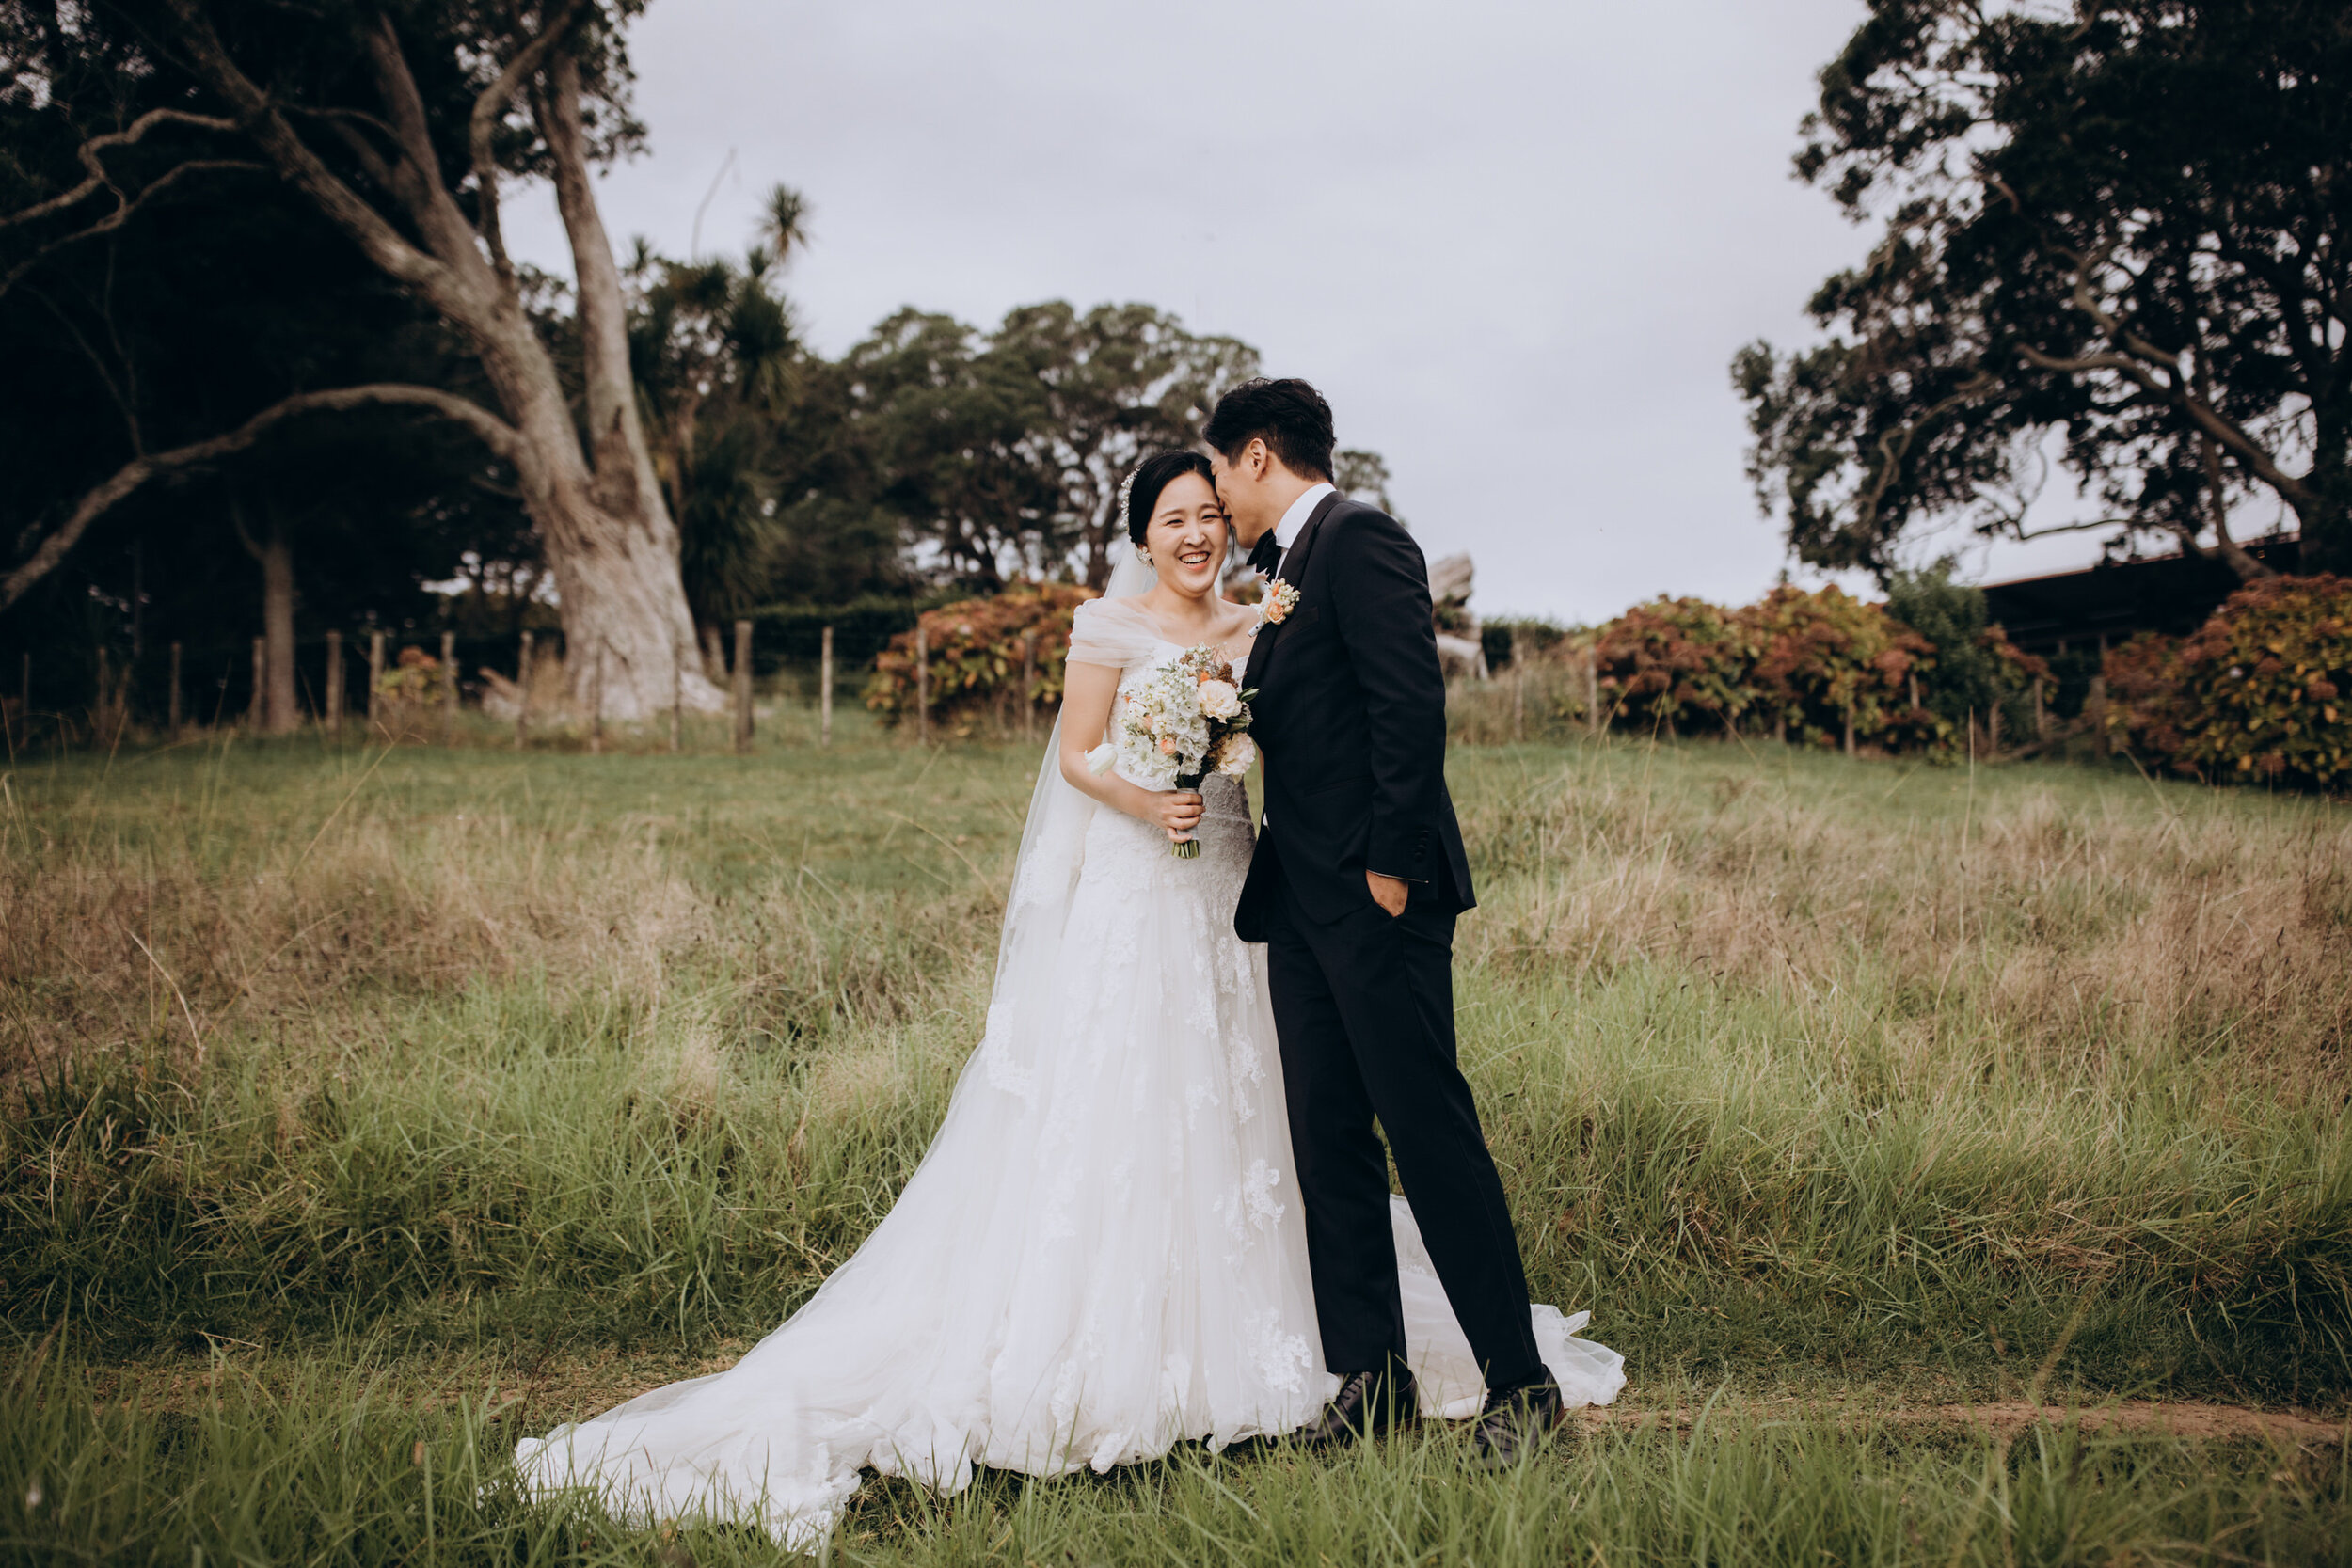 Wedding in Sorrento in the park | Cornwall park | Auckland 